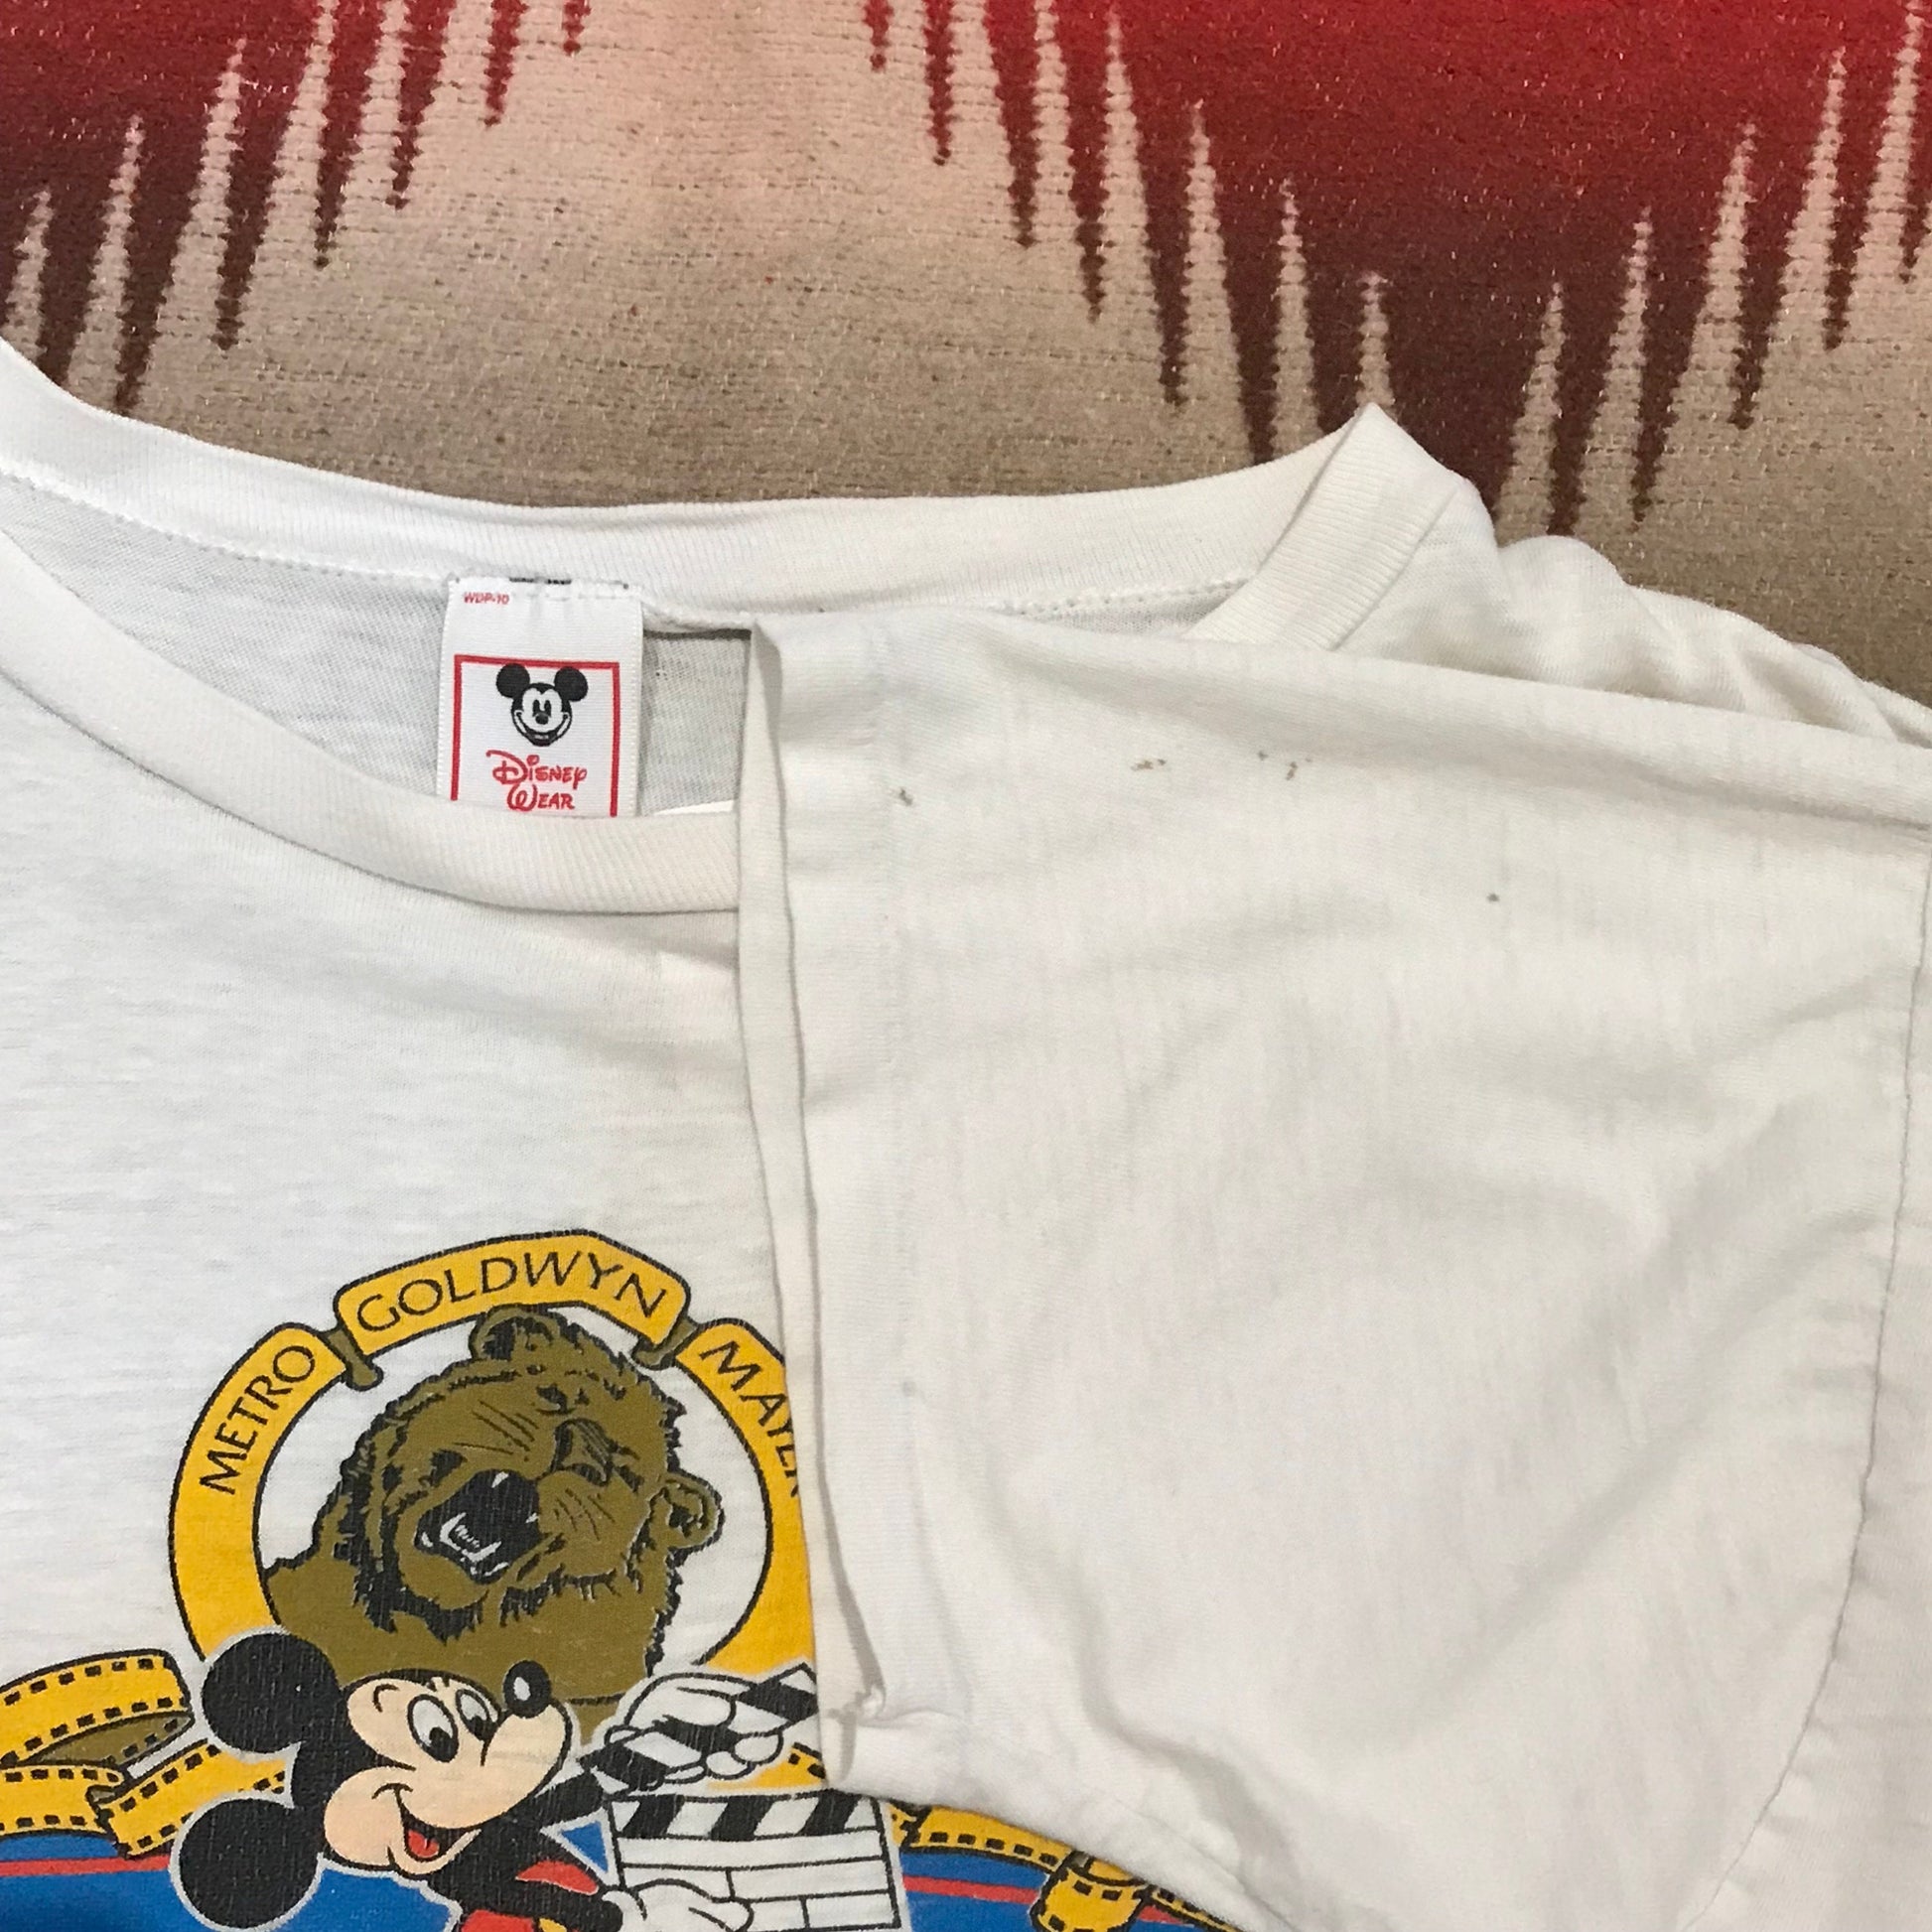 1980s/1990s Disney Wear Disney MGM Studios Mickey Mouse T-Shirt Made in USA Size L